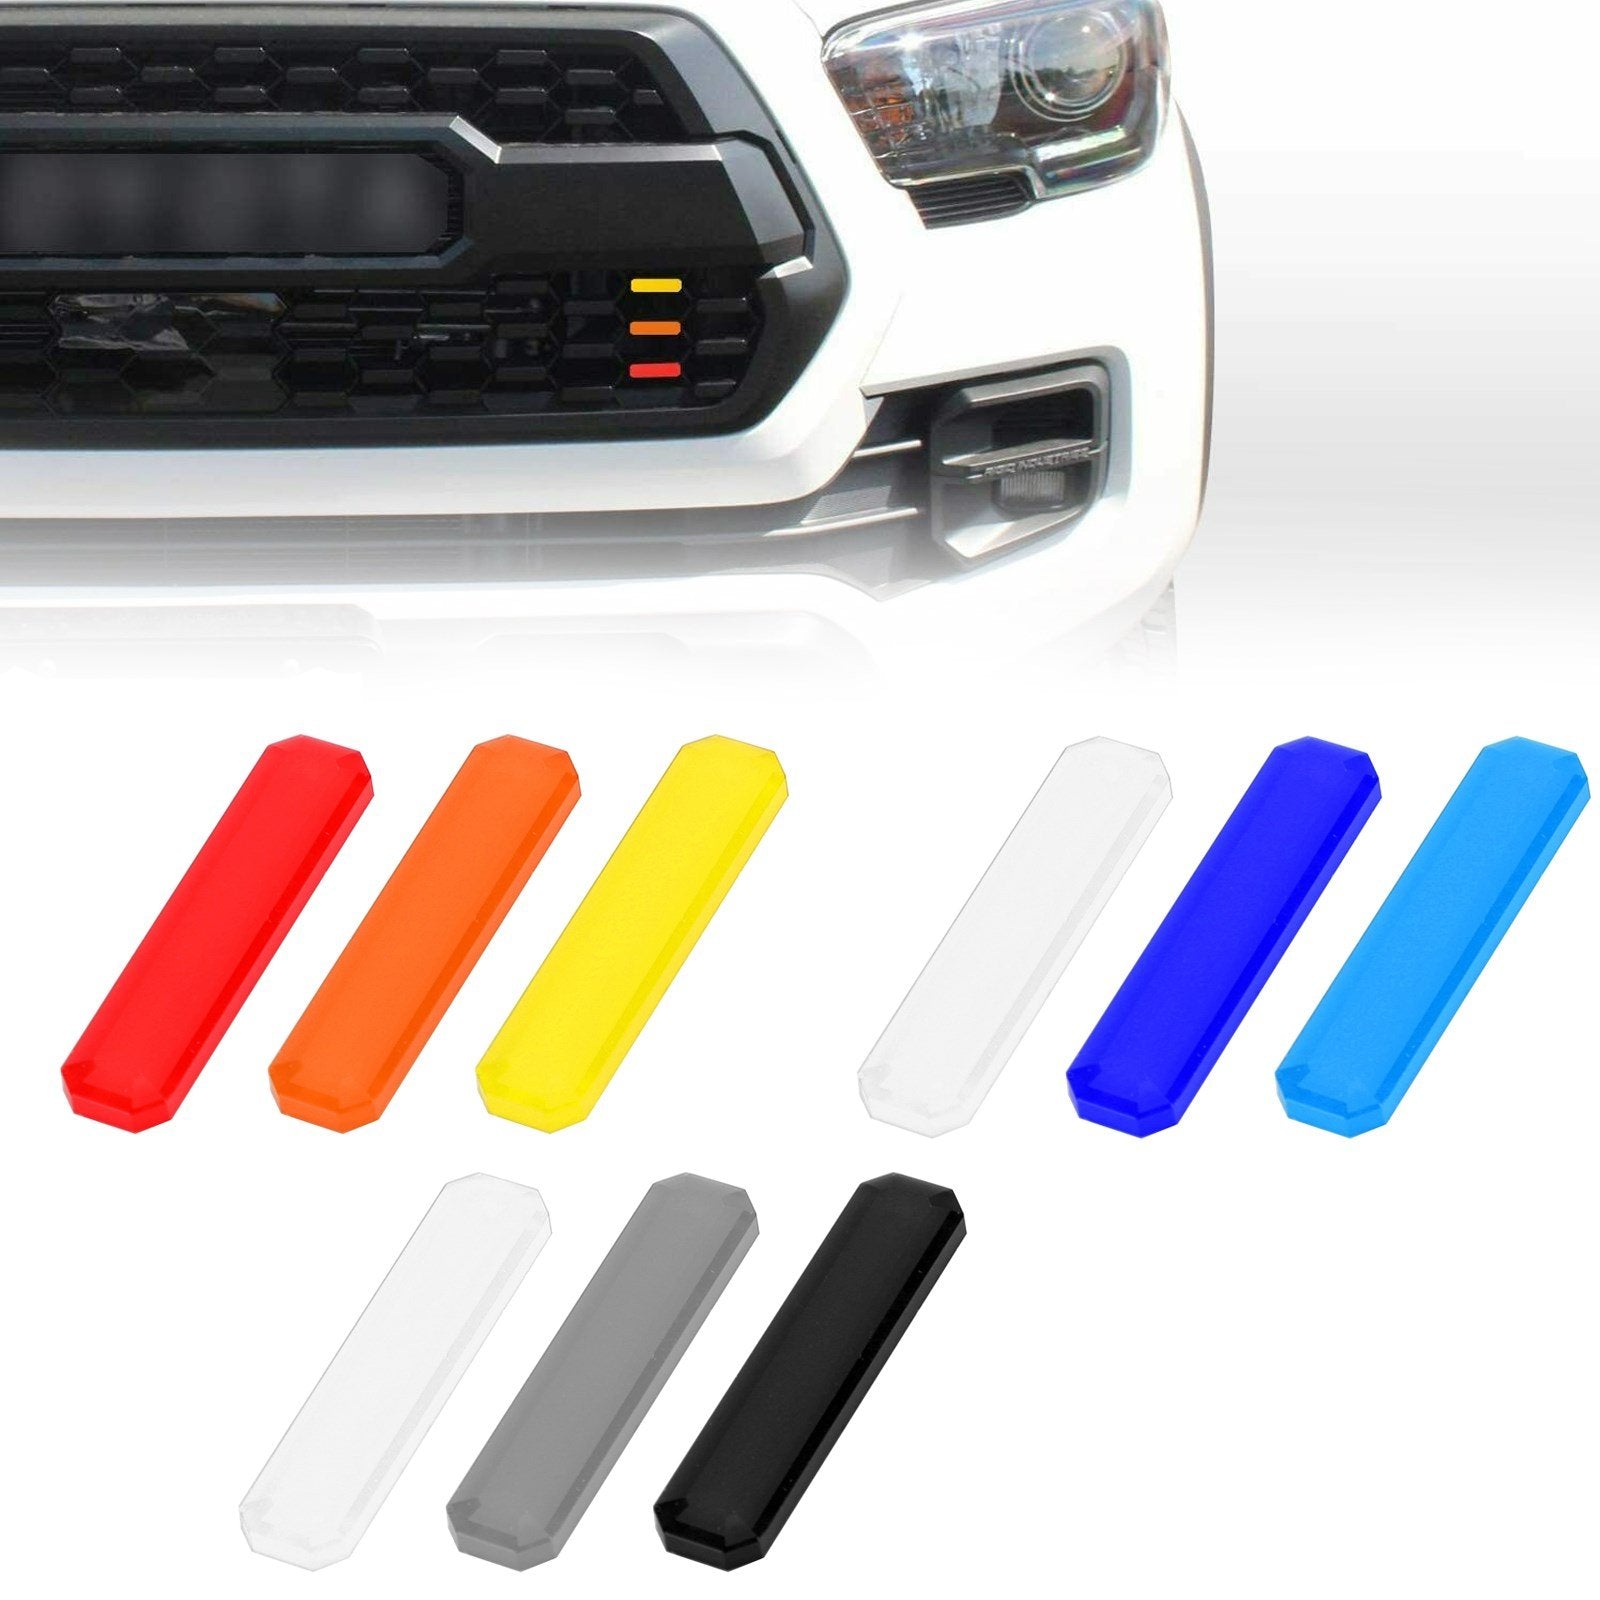 Tri-color Badge Front Grille Decal Sticker for Tacoma TRD Pro 2016-2020 Generic